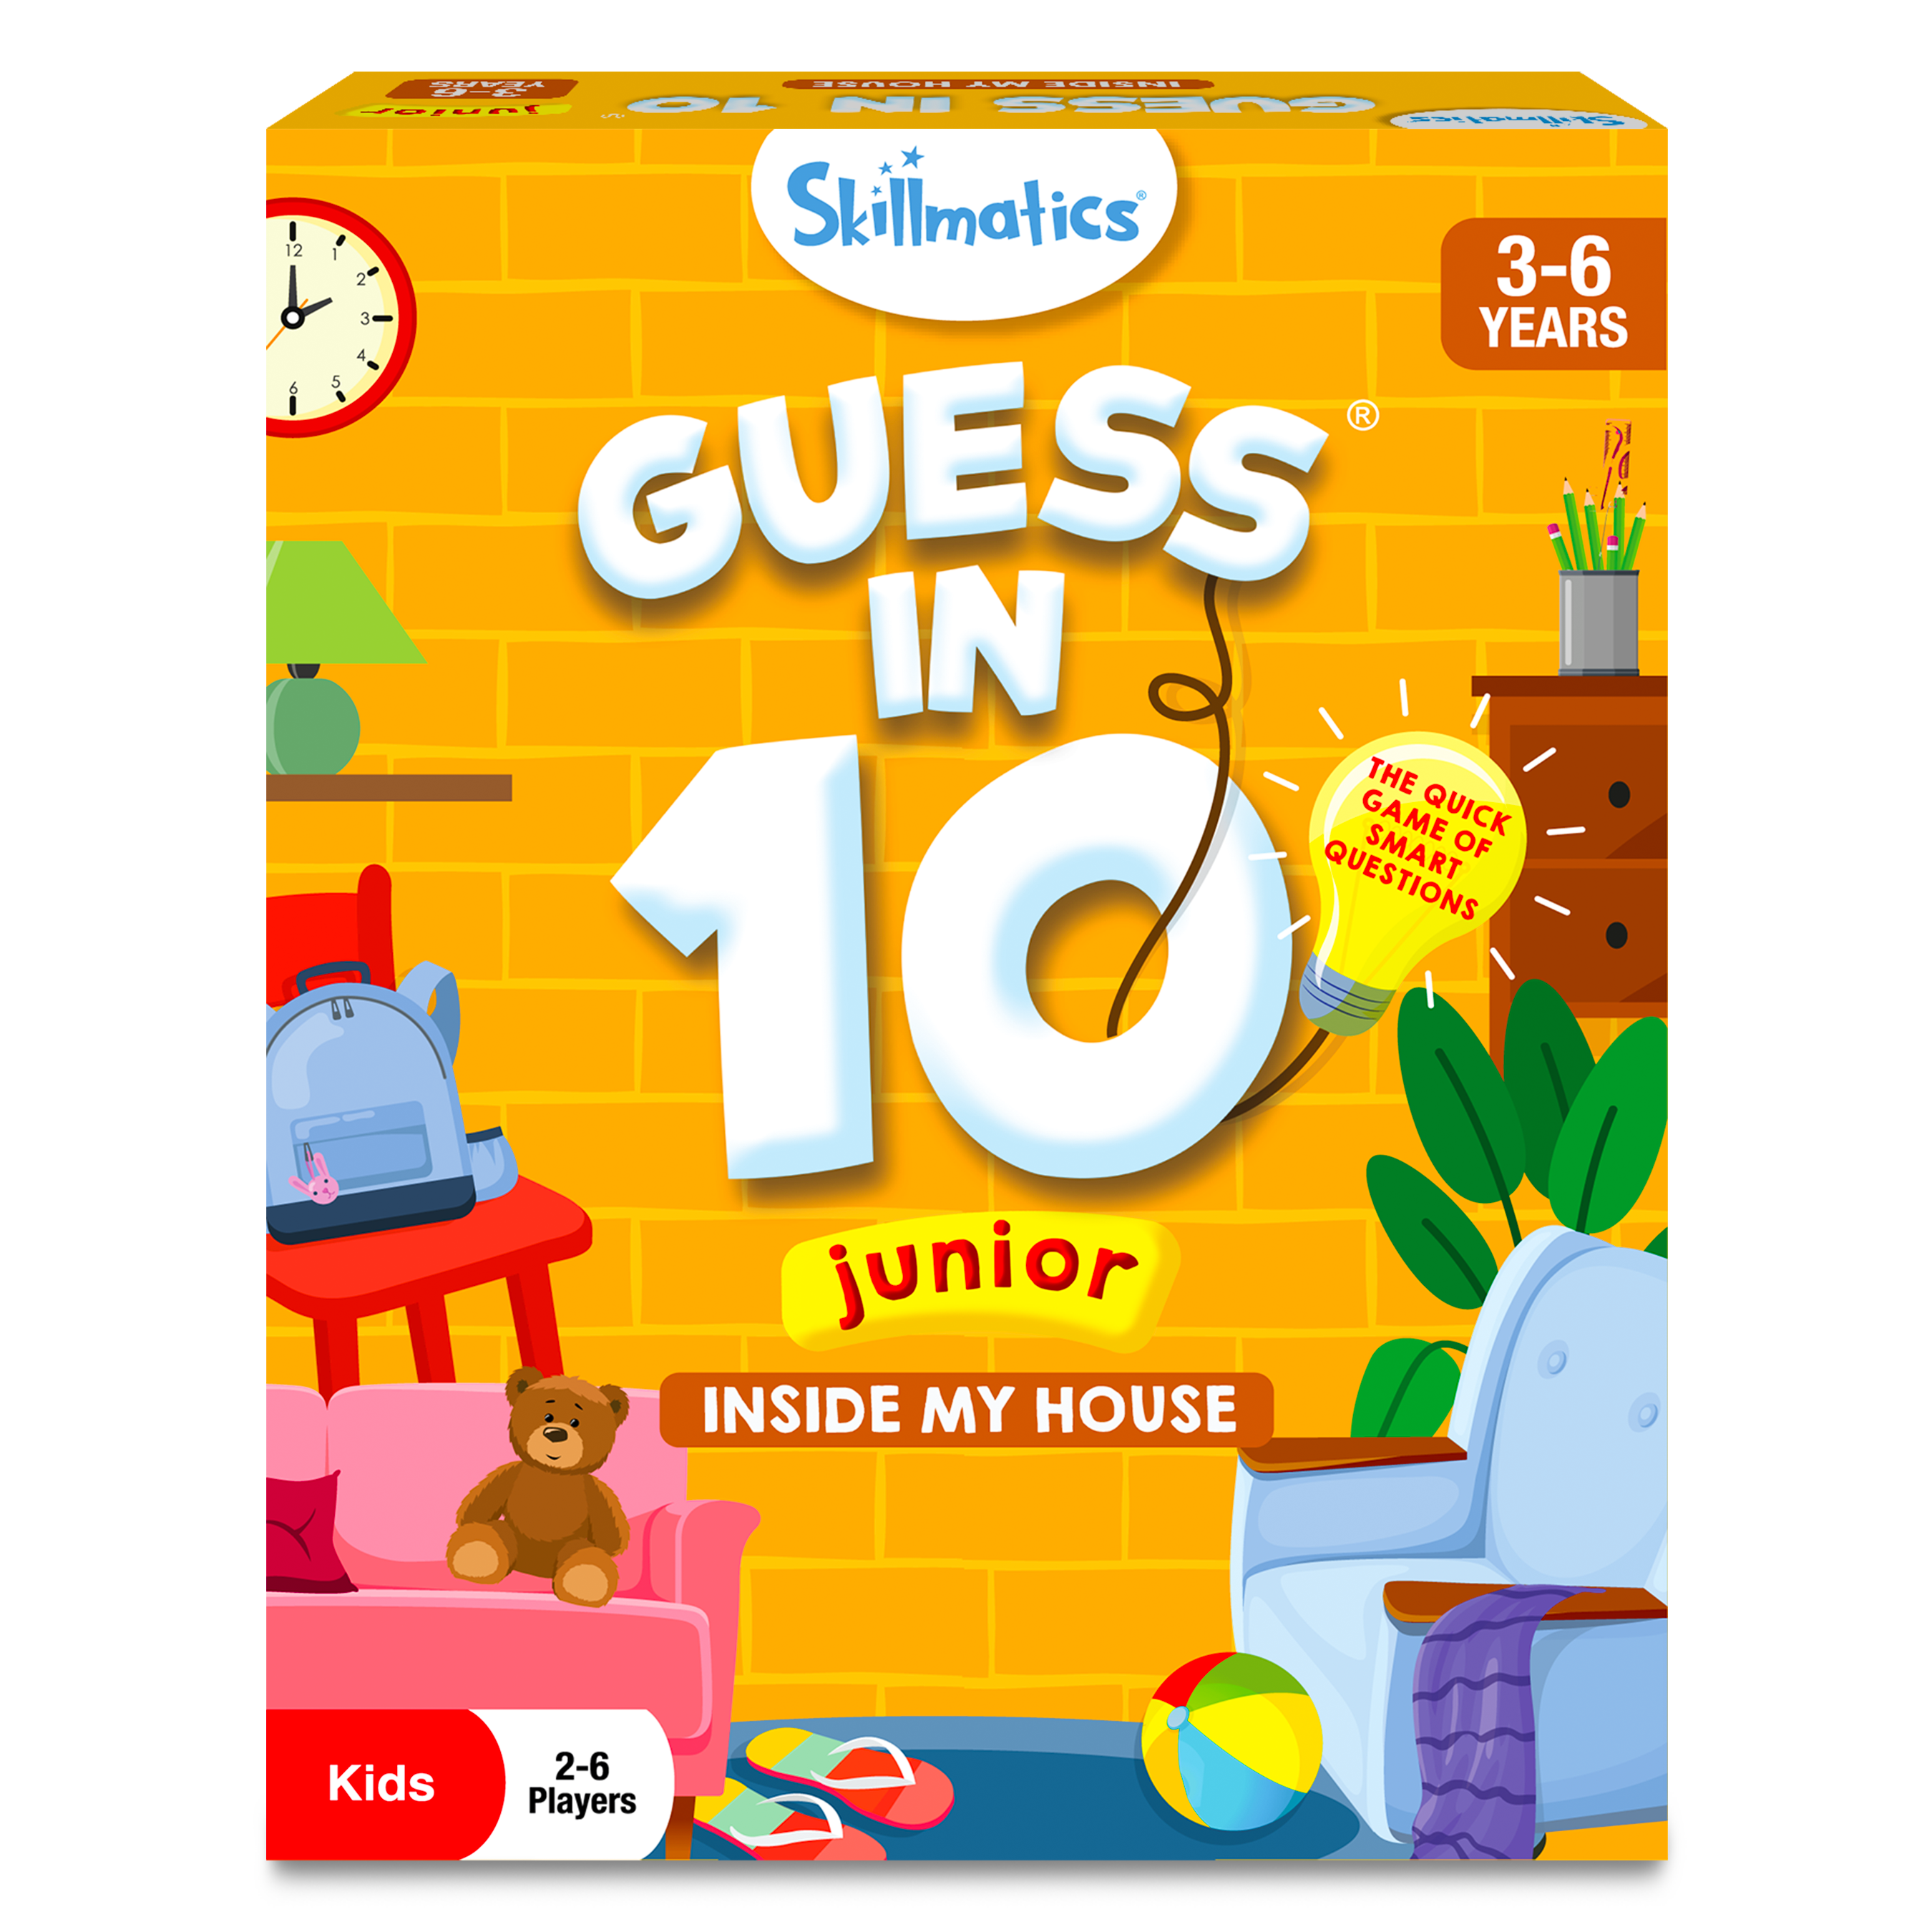 Guess in 10 Junior - Inside My House